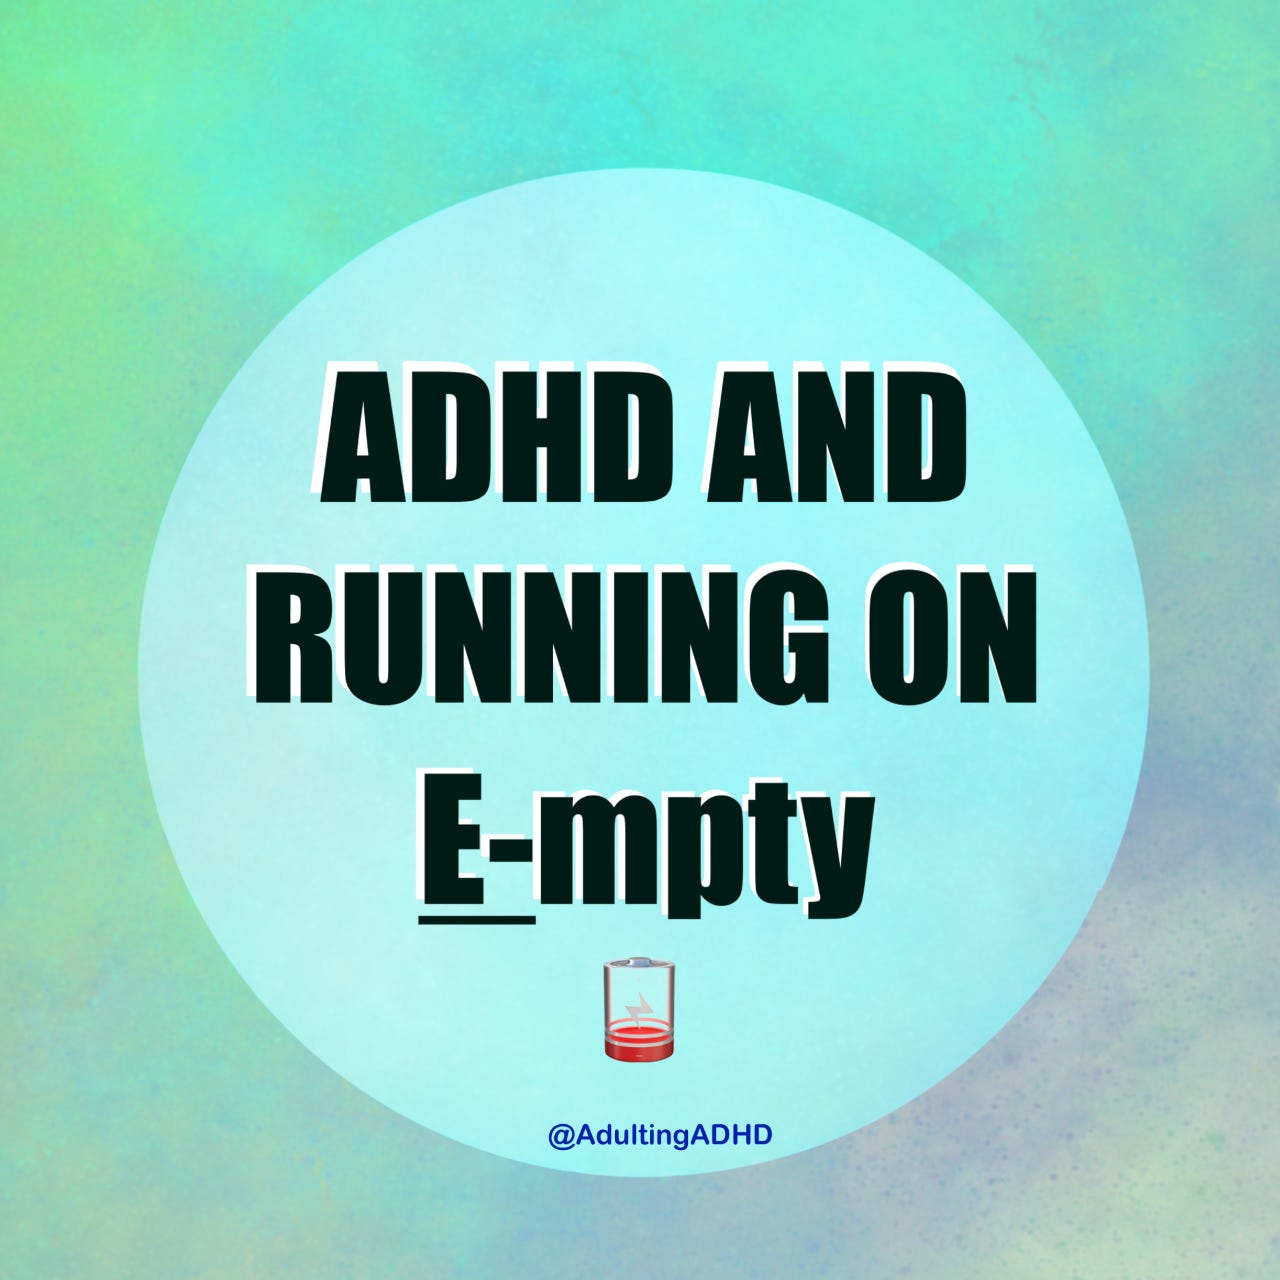 A turquoise circle with the text written ‘ADHD and running on empty’ with a low battery emoji. The graphic can be found on my instagram.com/AdultingADHD